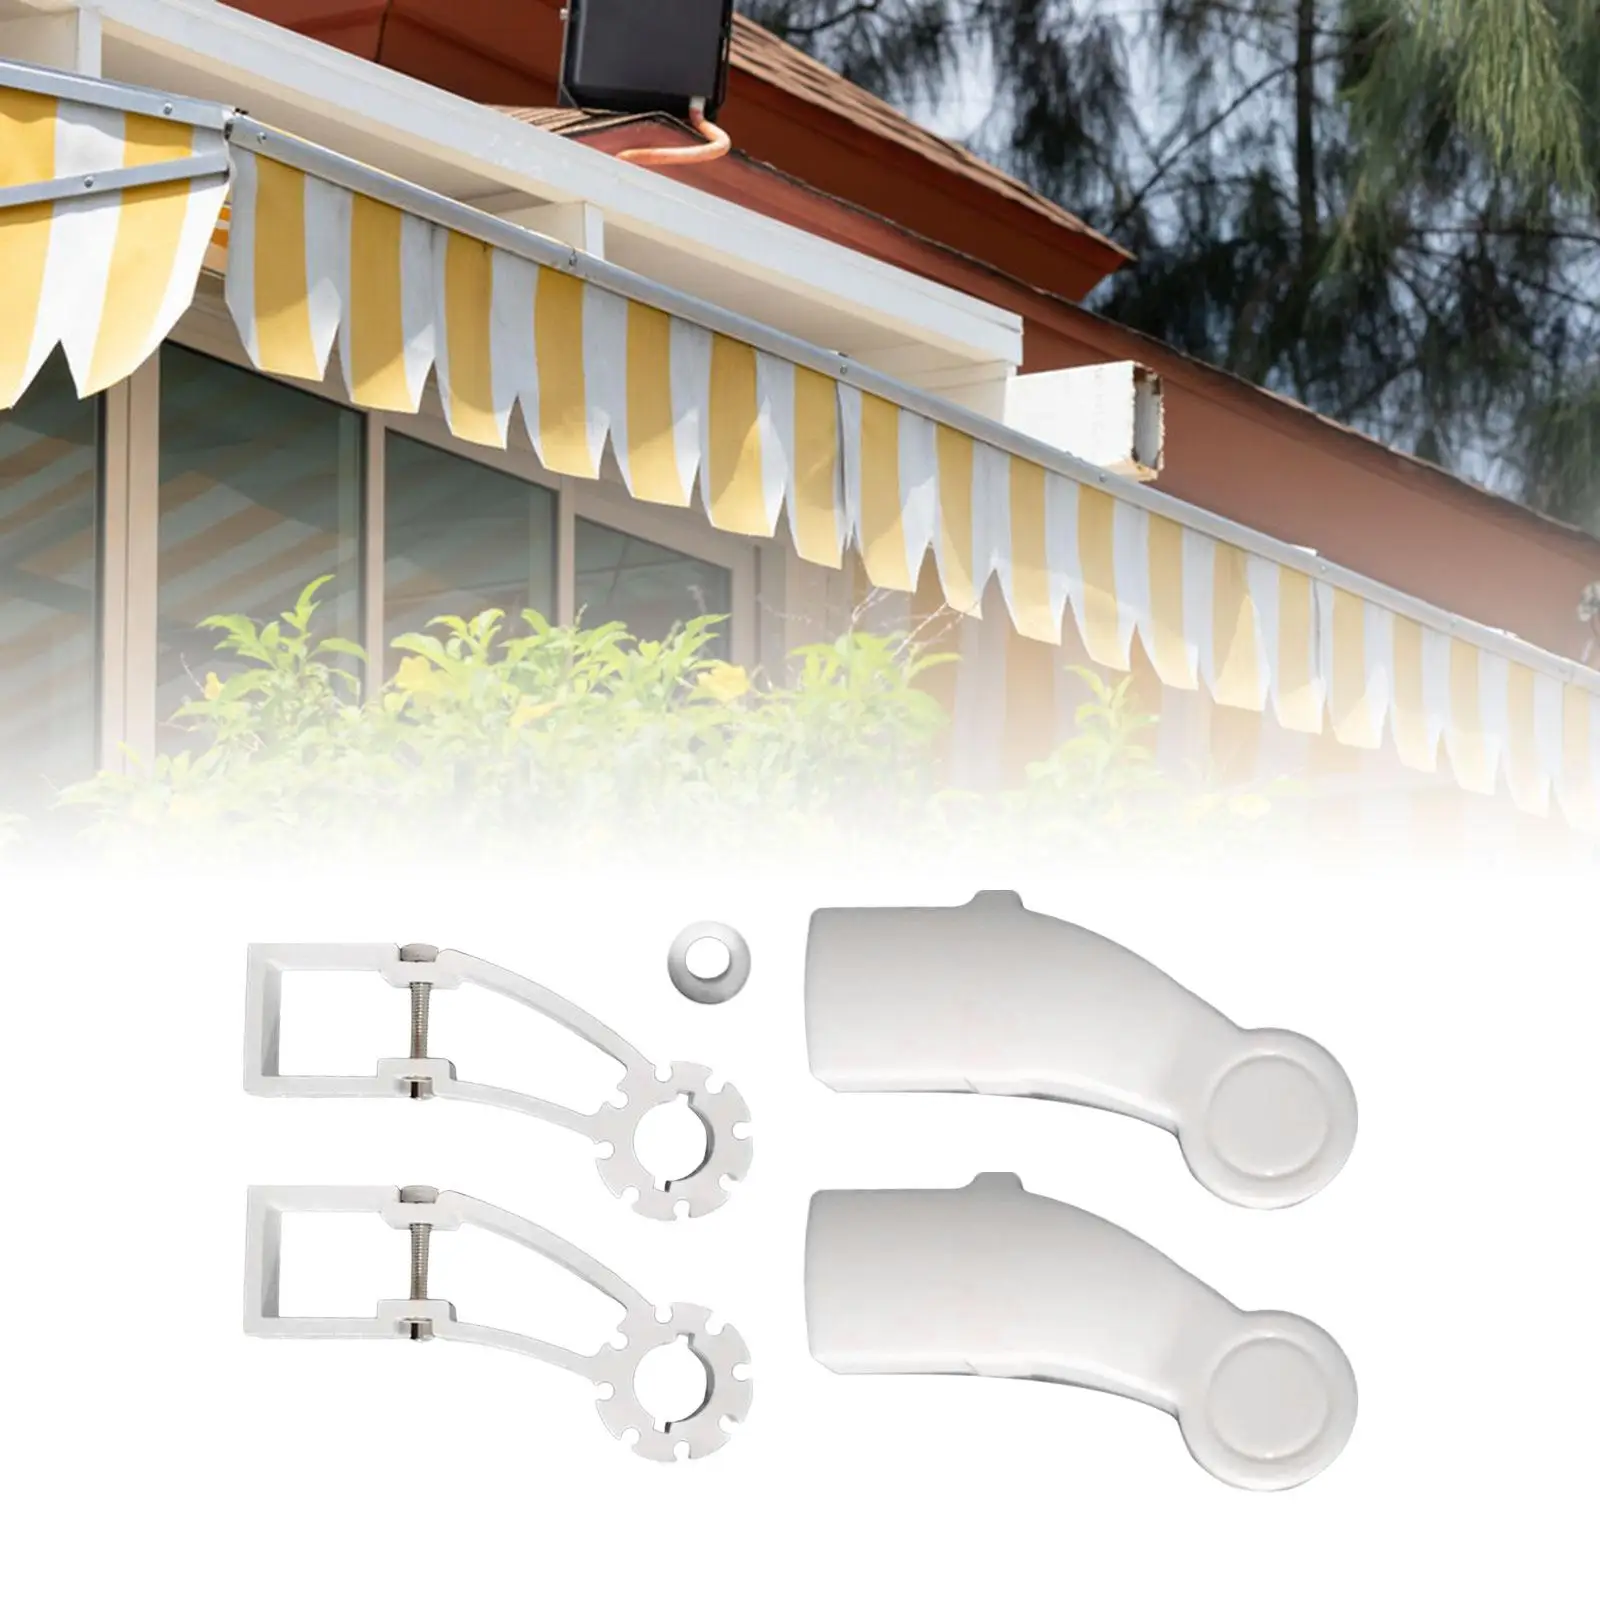 Awning Brackets 40mm Square Tube Retractable Awning Gearbox Support Brackets Easy to Install Accessories for Camper RV Trailer